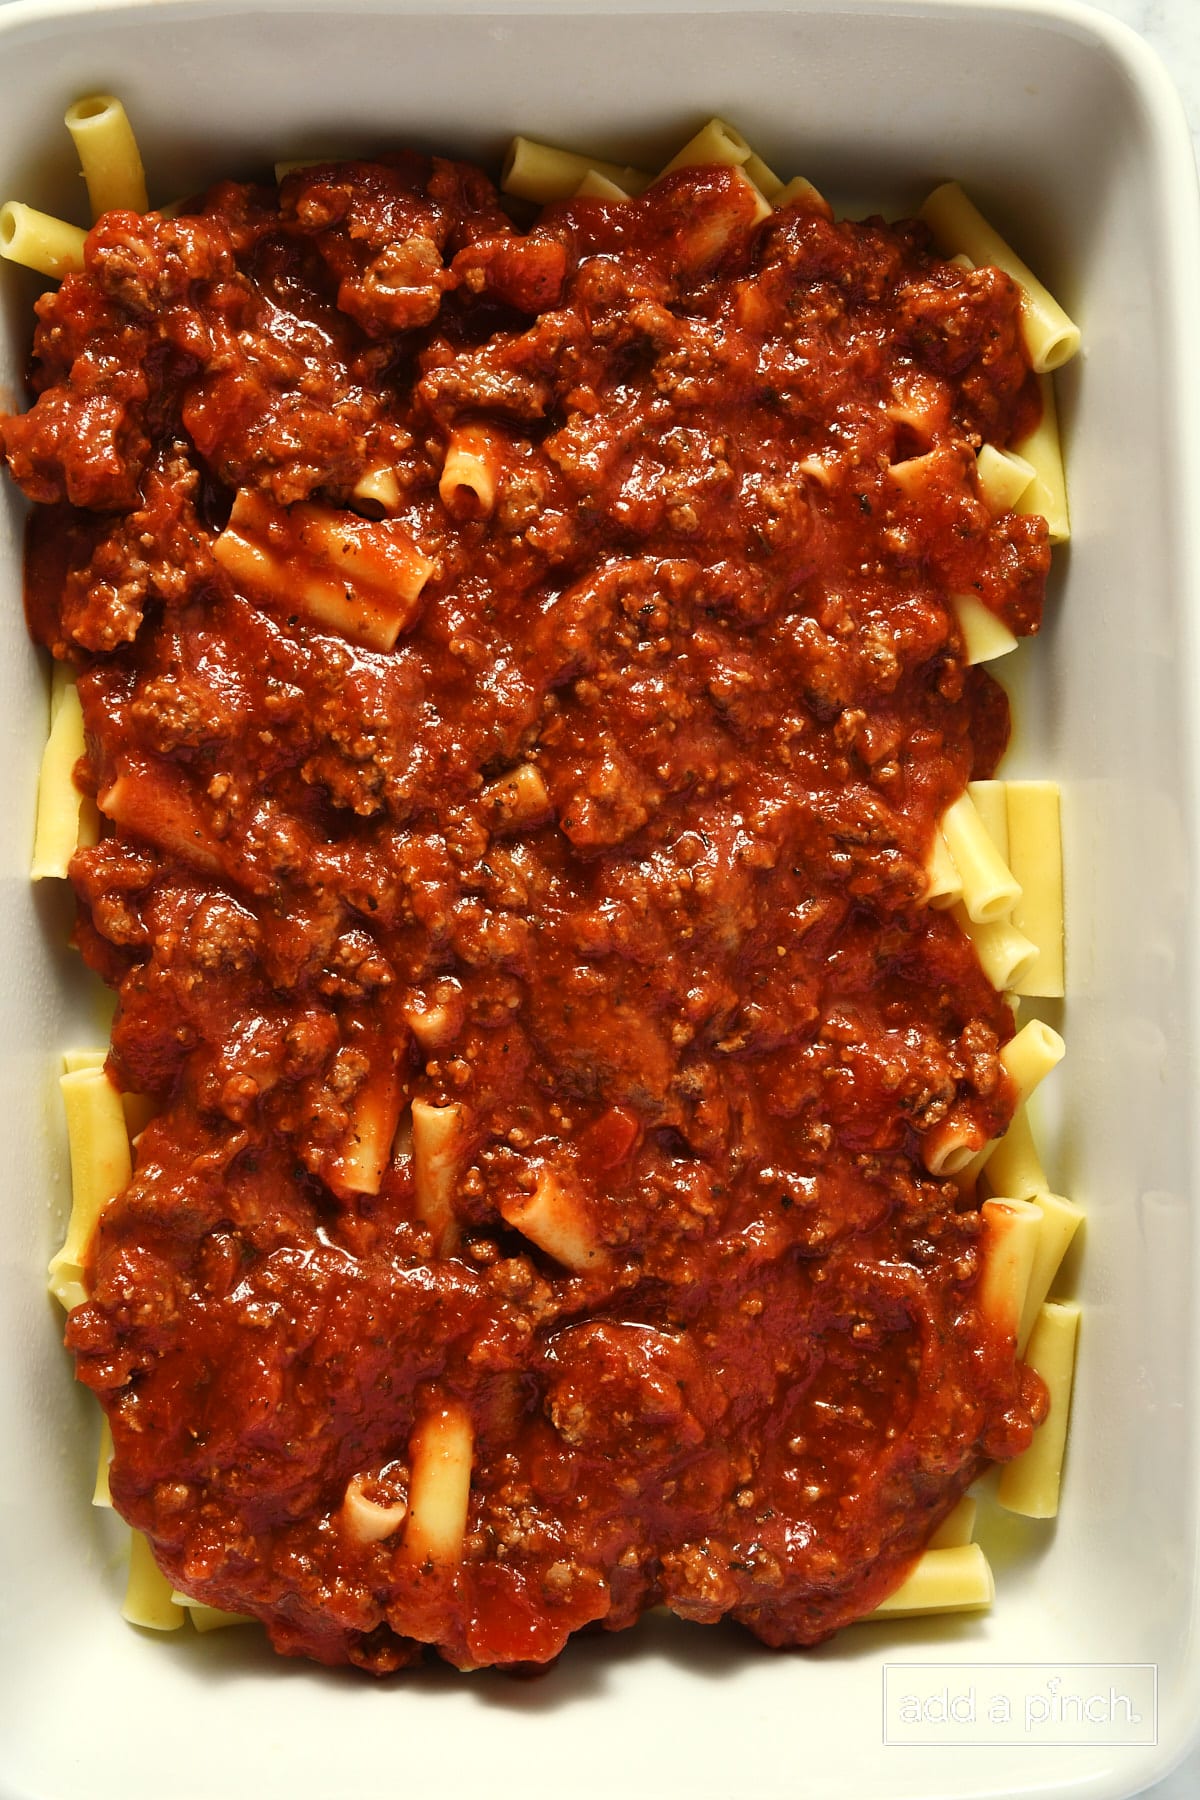 White baking dish with noodles and a layer of meat sauce on top.